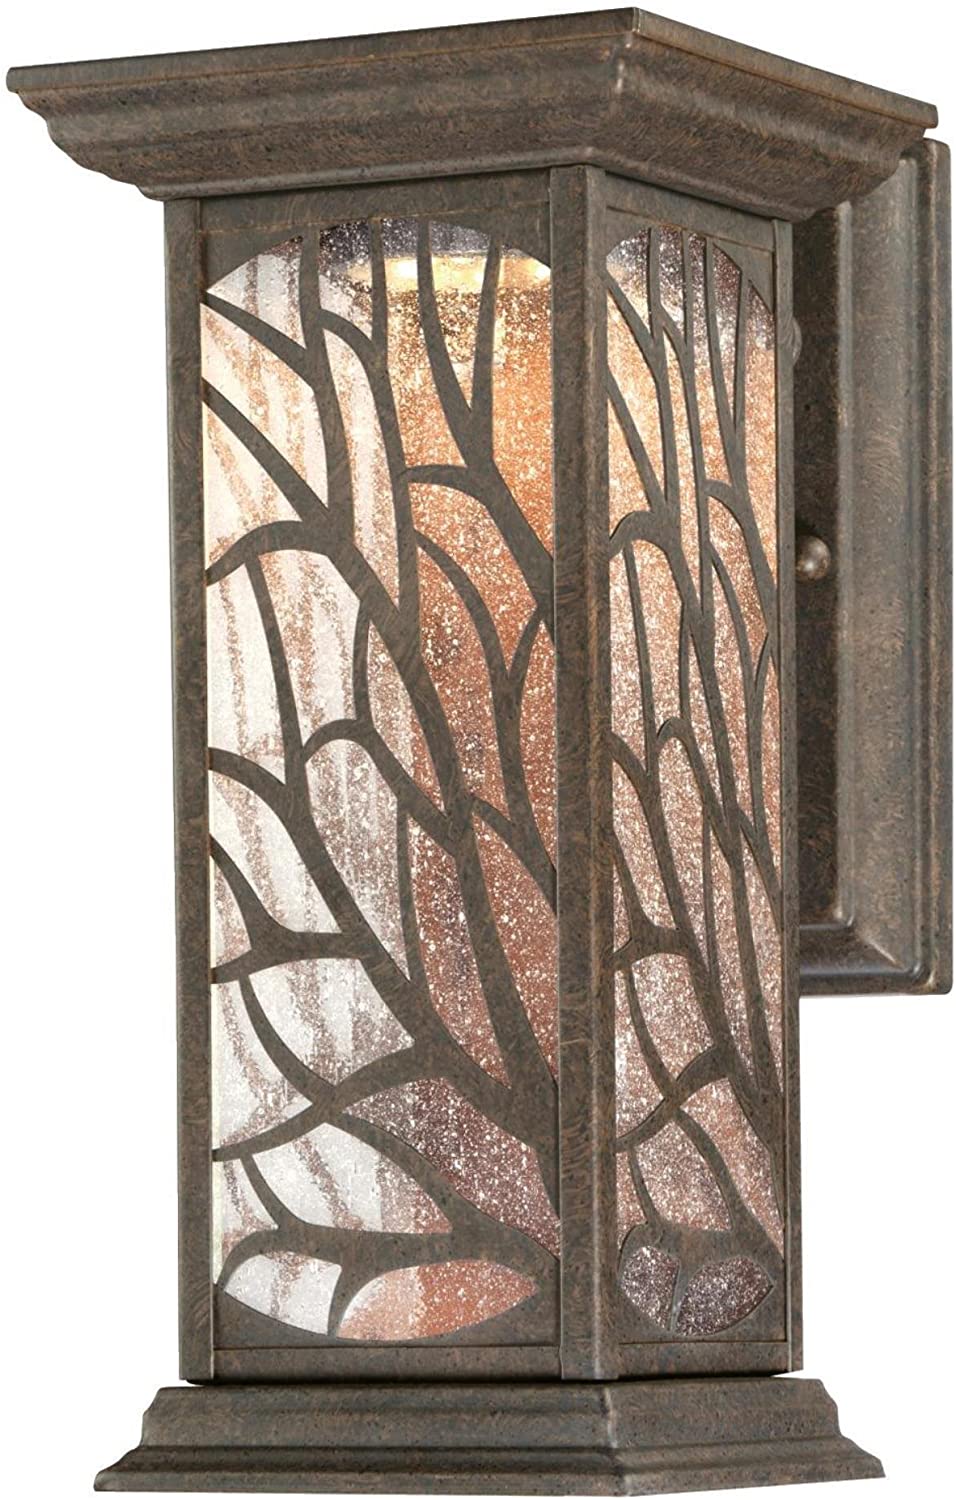 6312000 Glenwillow One-Light LED, Victorian Bronze Finish with Clear Seeded Glass Outdoor Wall Fixture - image 1 of 2